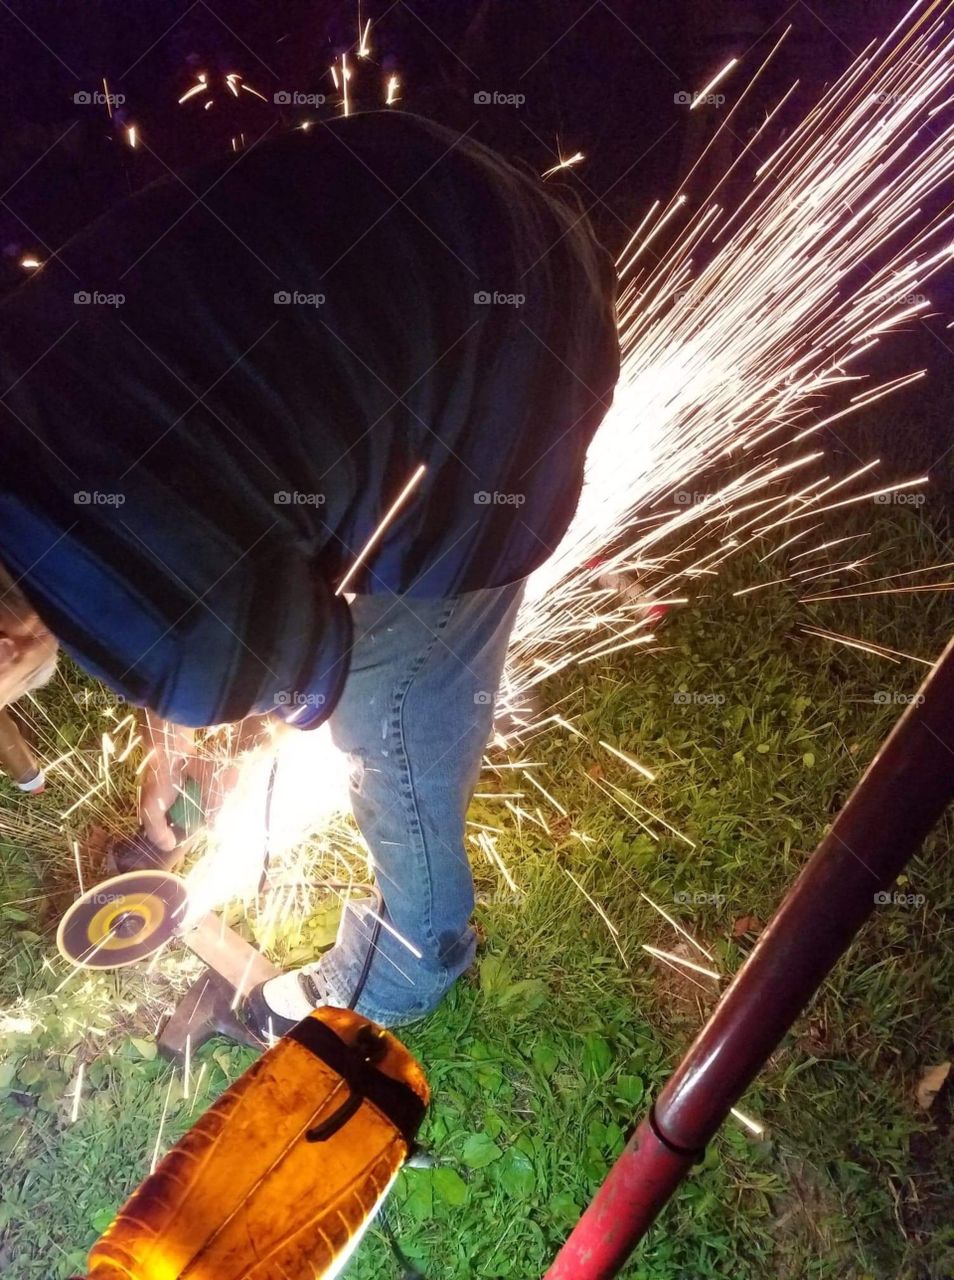 Welding the frame on the work truck, after hours